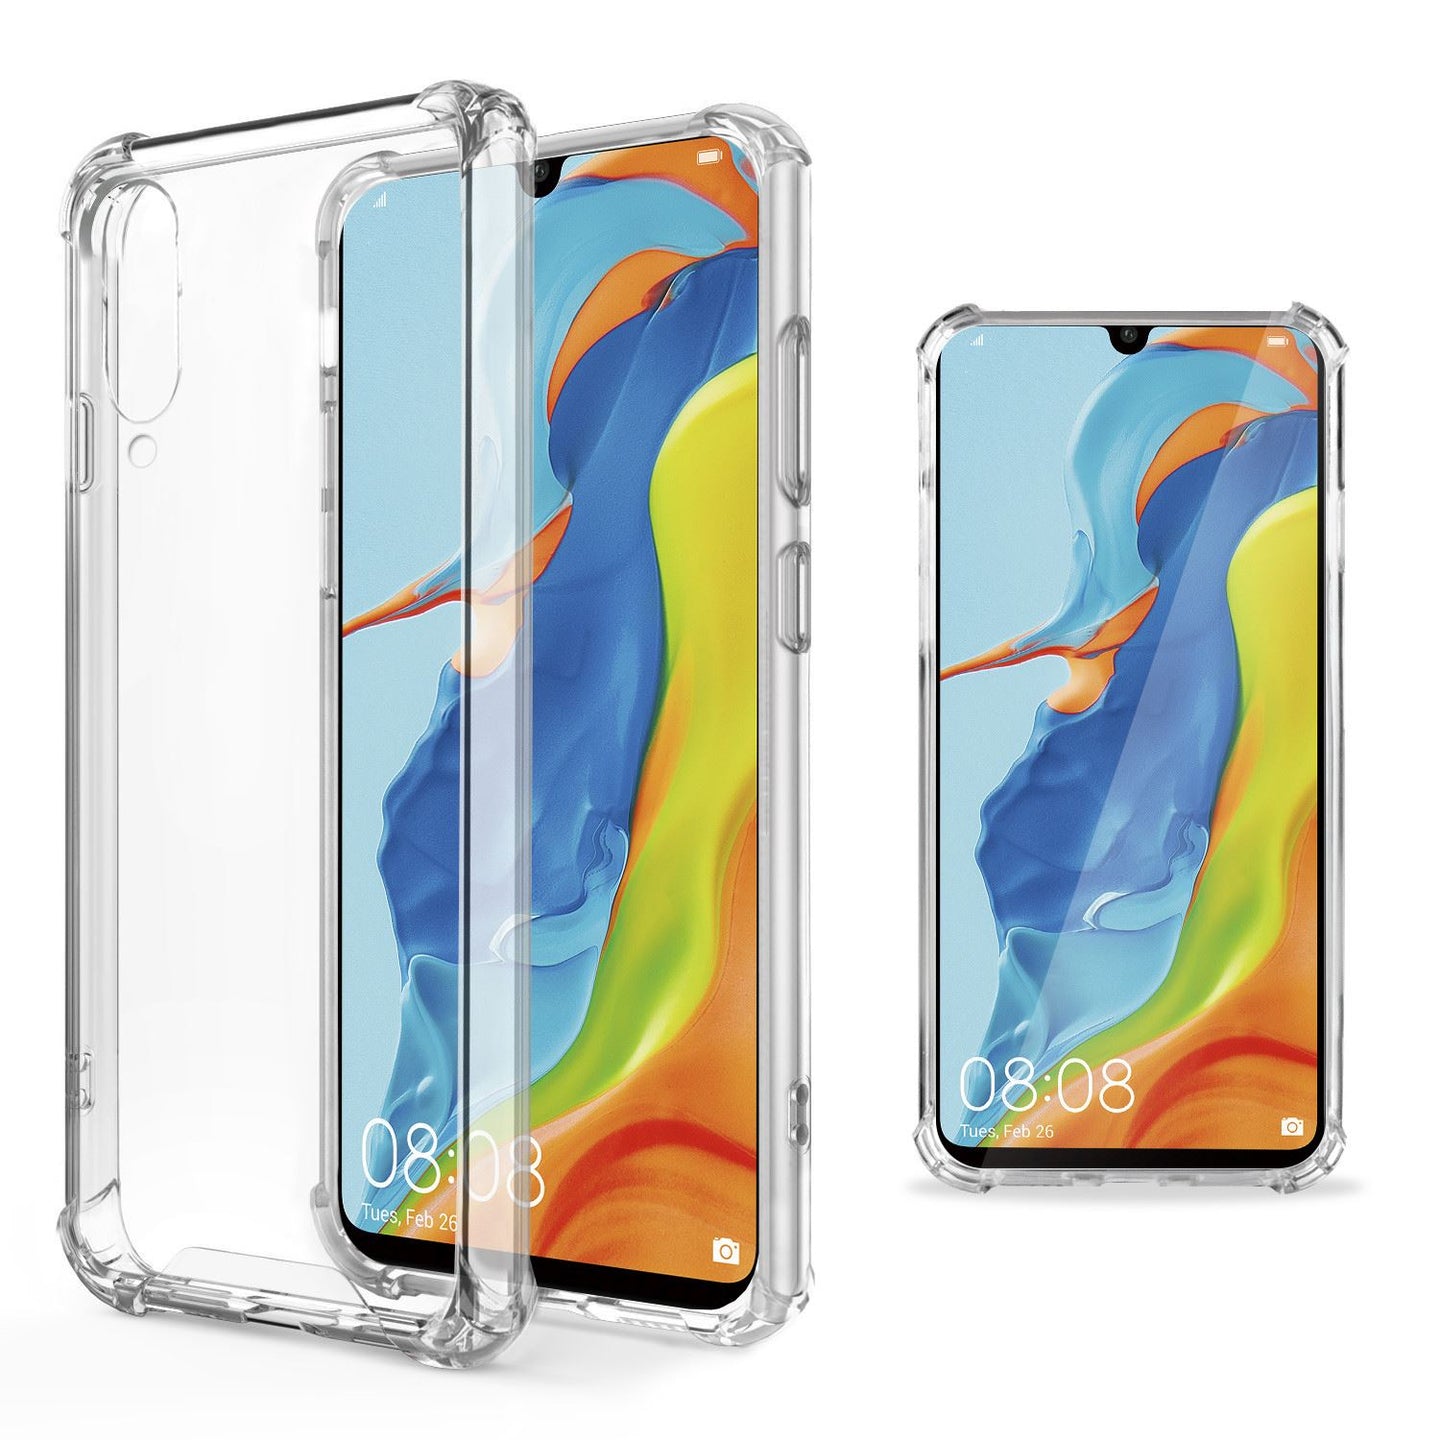 Moozy Shock Proof Silicone Case for Huawei P30 Lite - Transparent Crystal Clear Phone Case Soft TPU Cover